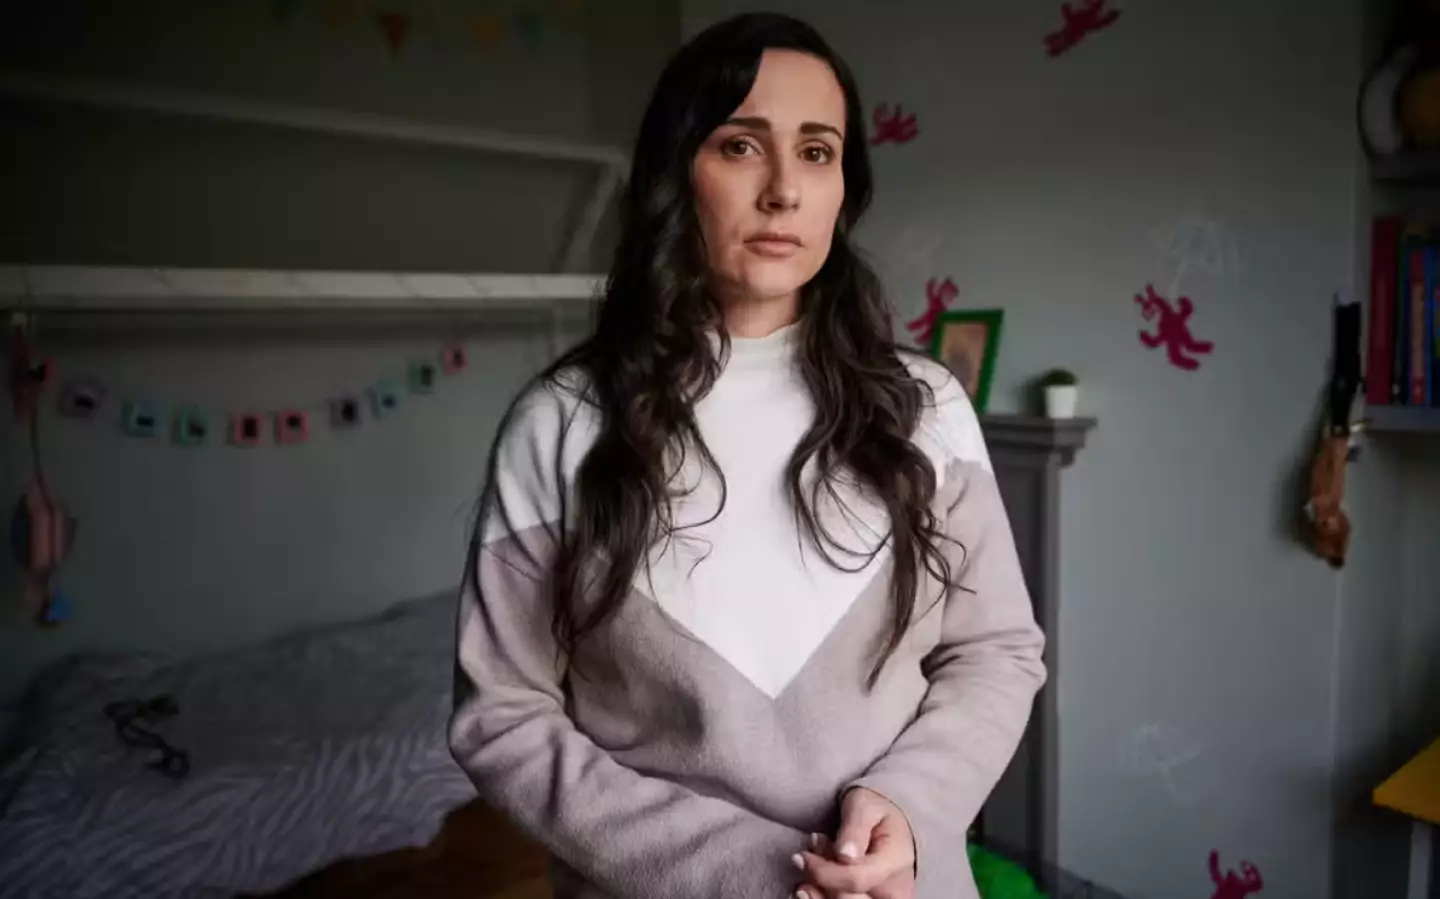 The heartbroken mums accused have spoken out in the documentary.